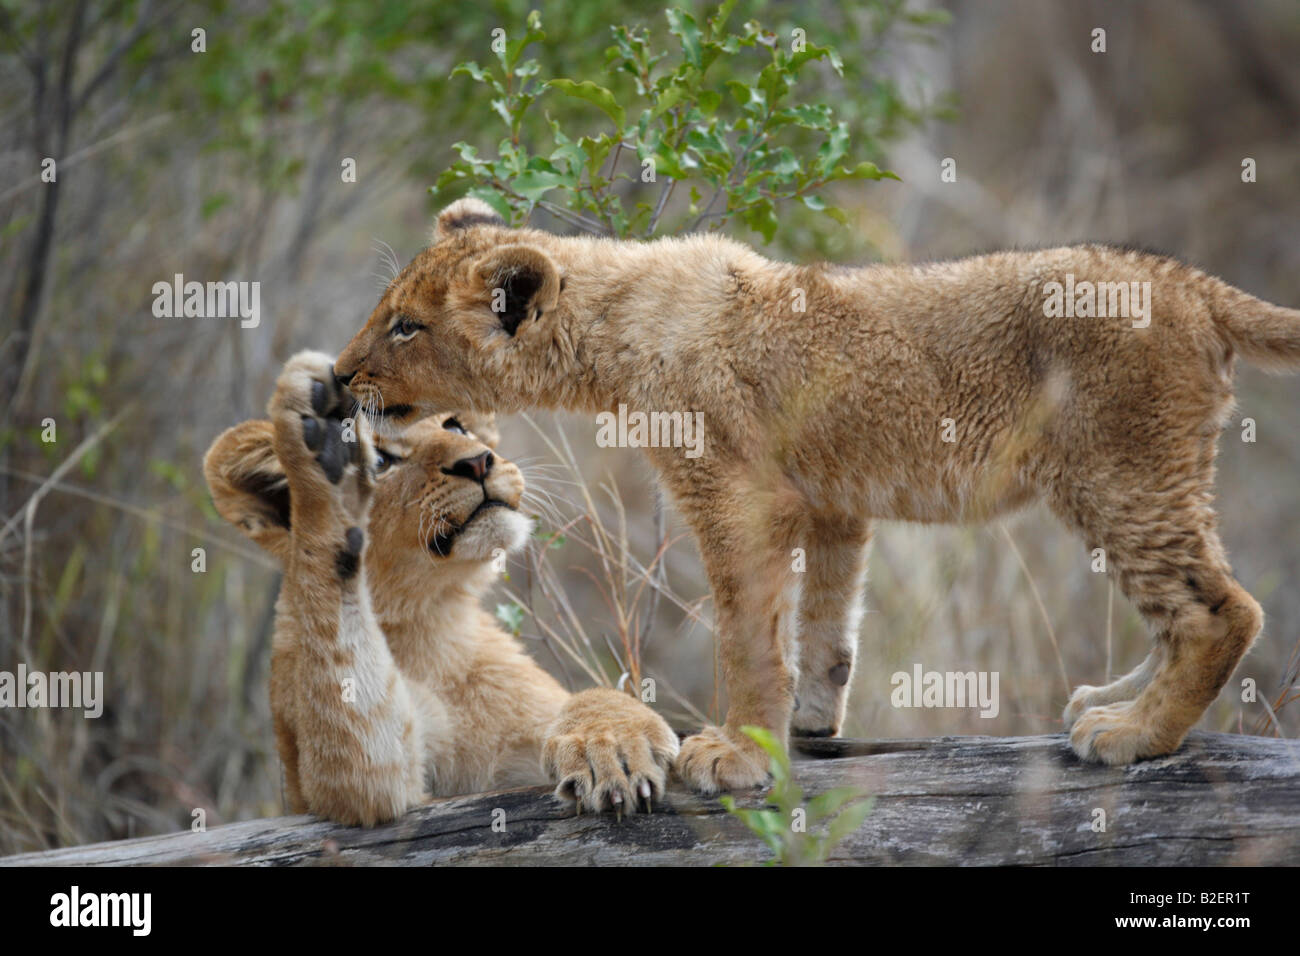 Two lion cubs playing on a log Stock Photo